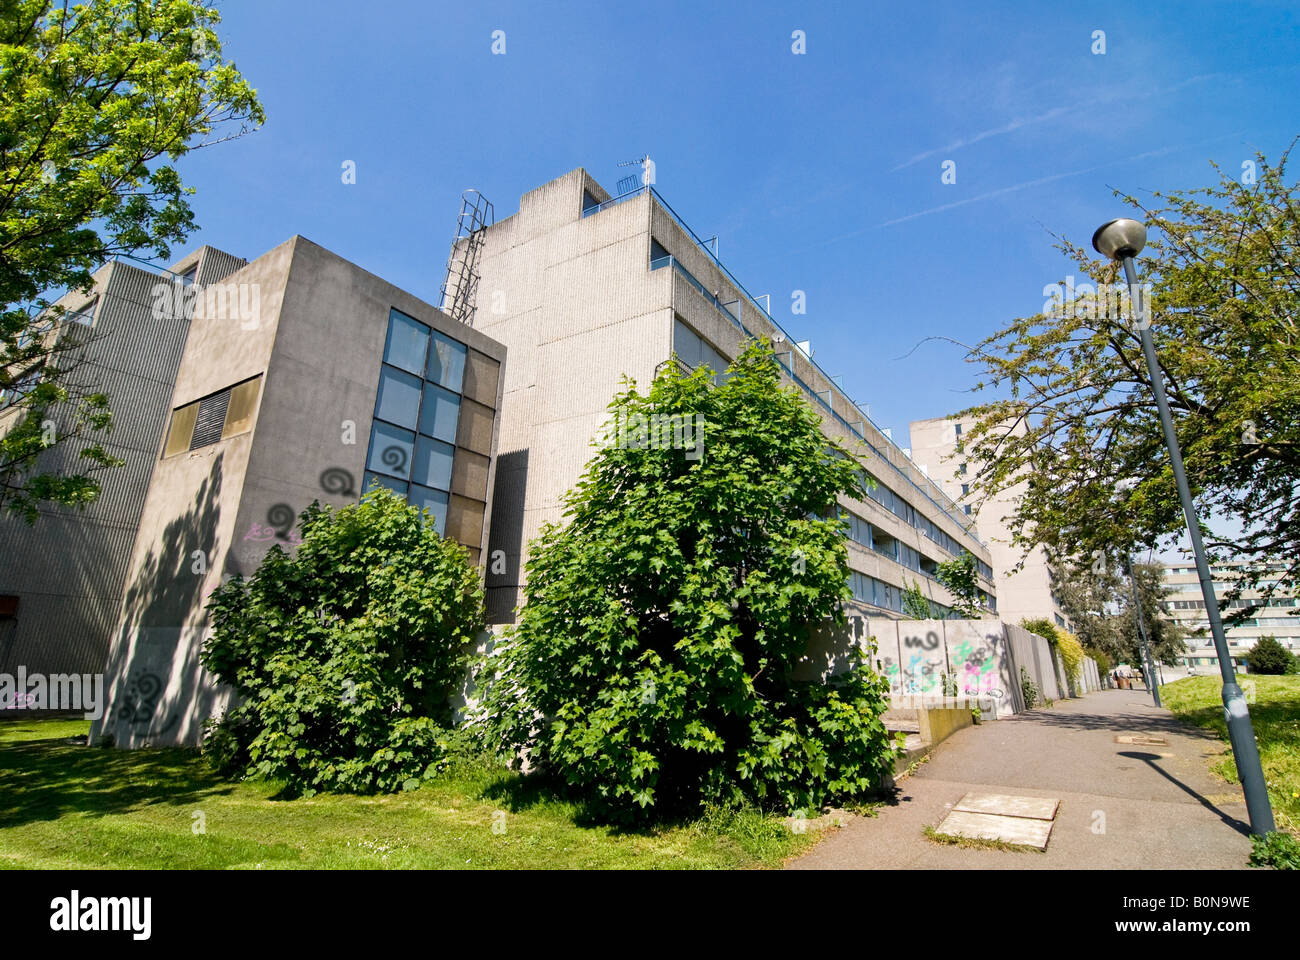 Horizontal wide angle of the Ferrier Estate in Kidbrooke Park on a bright sunny day. Stock Photo